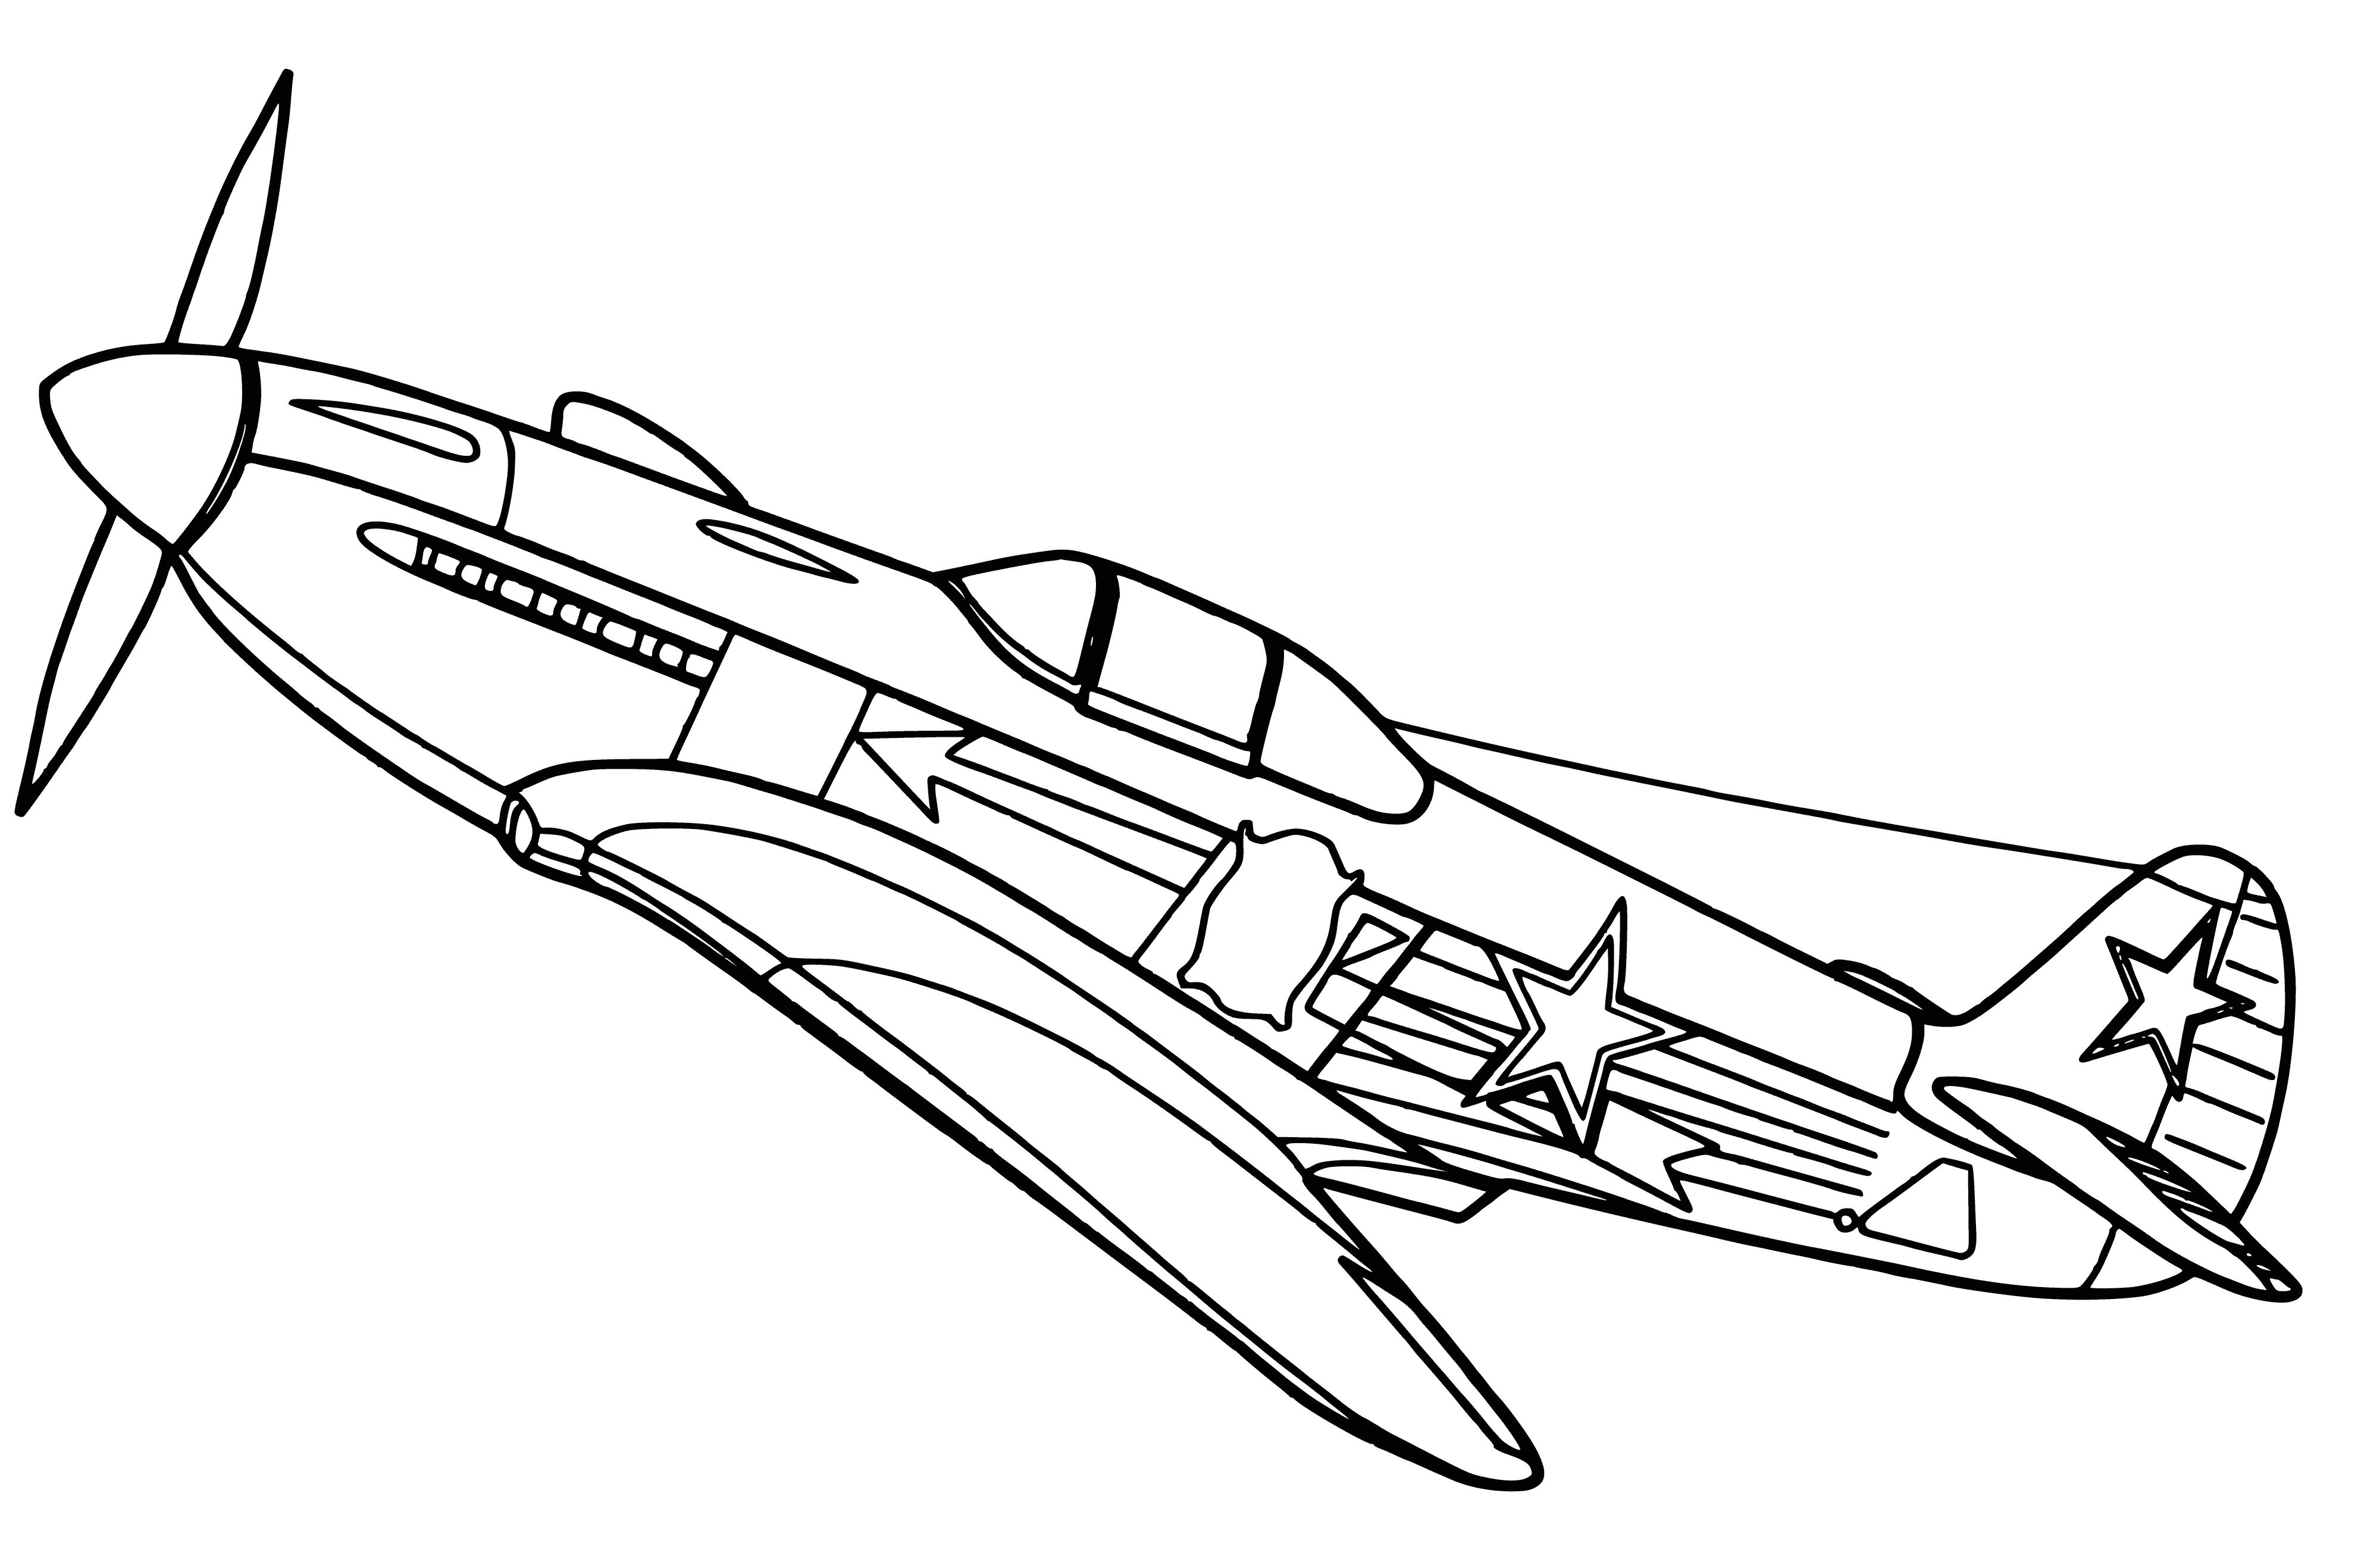 Fighter Yak-3 coloring page